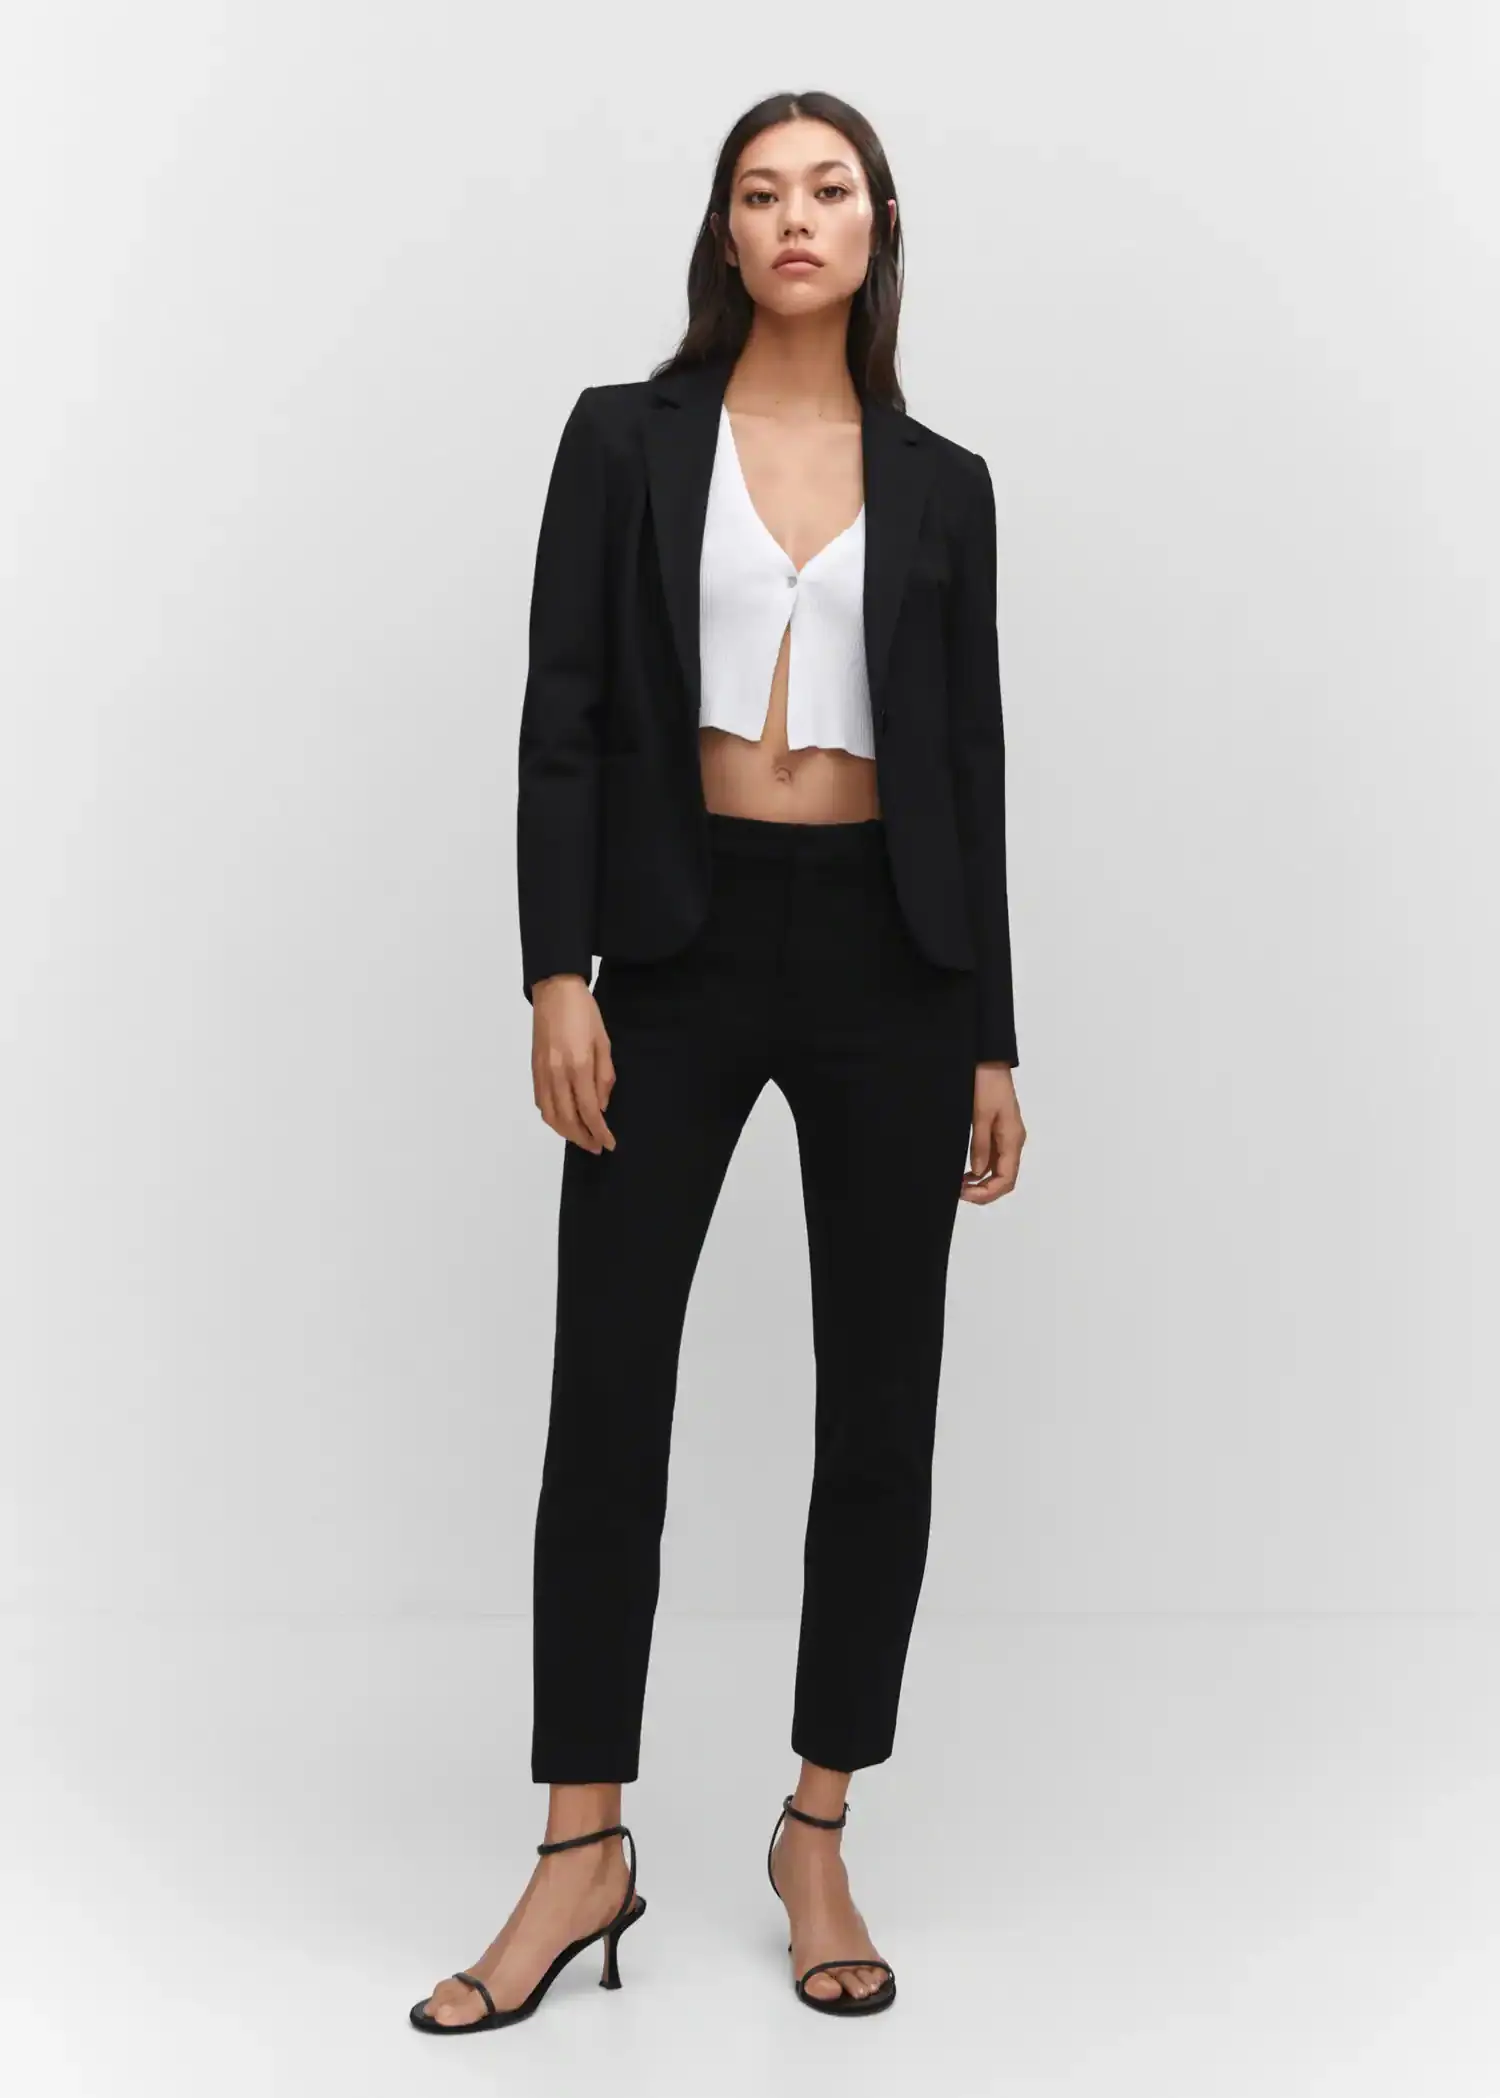 Mango Rome-knit straight pants. a woman wearing a black suit and a white top. 